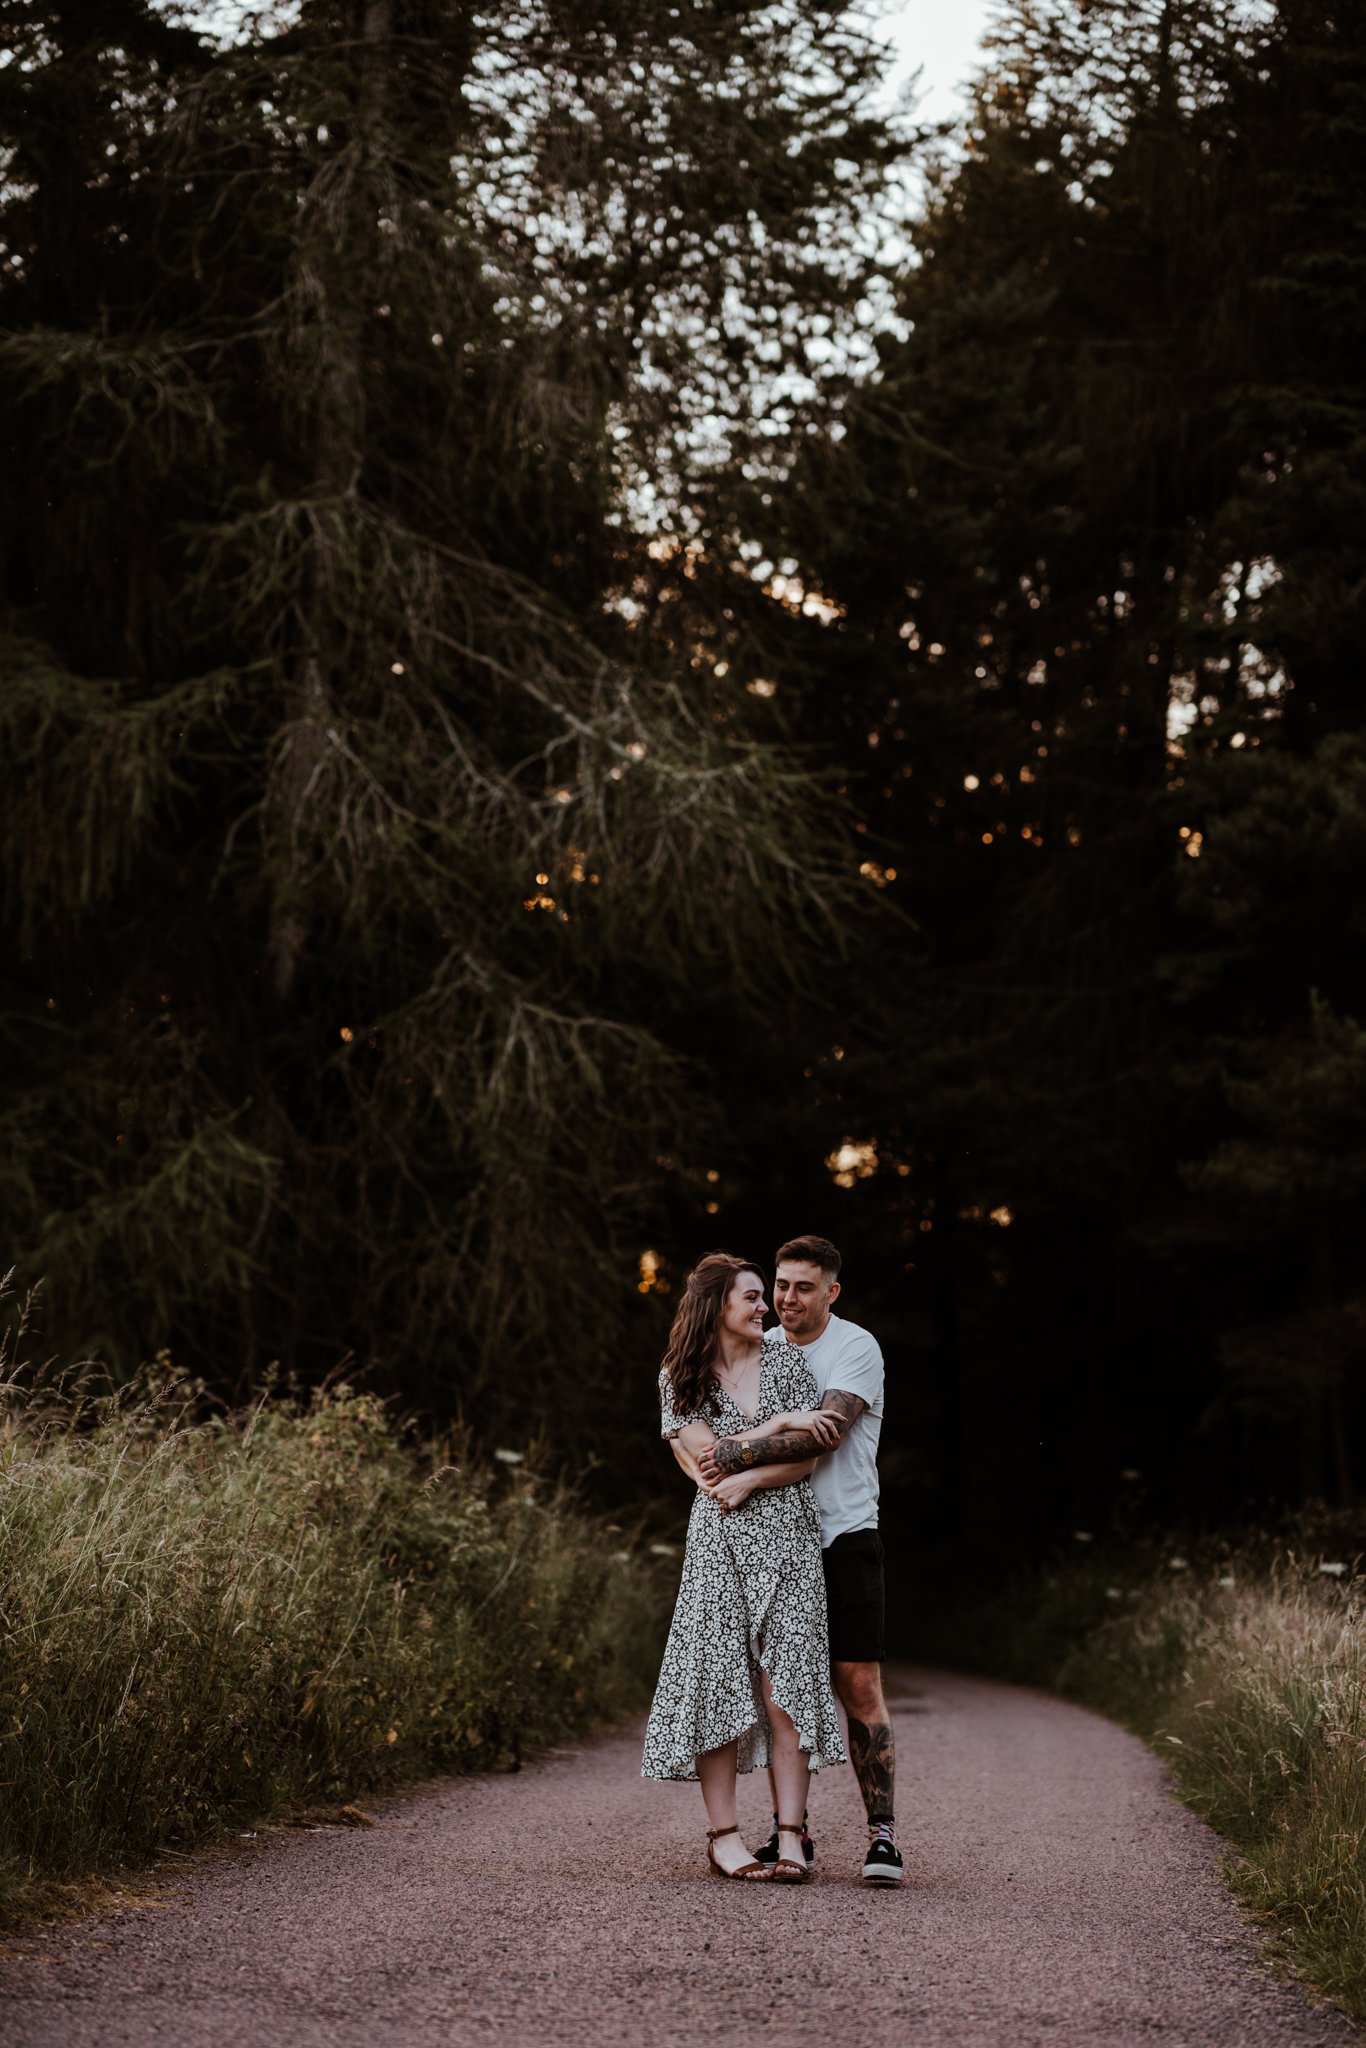 Angus Scotland Engagement and Wedding Photographer - Emily and Gabriel - Adventure Couple Session73.jpg